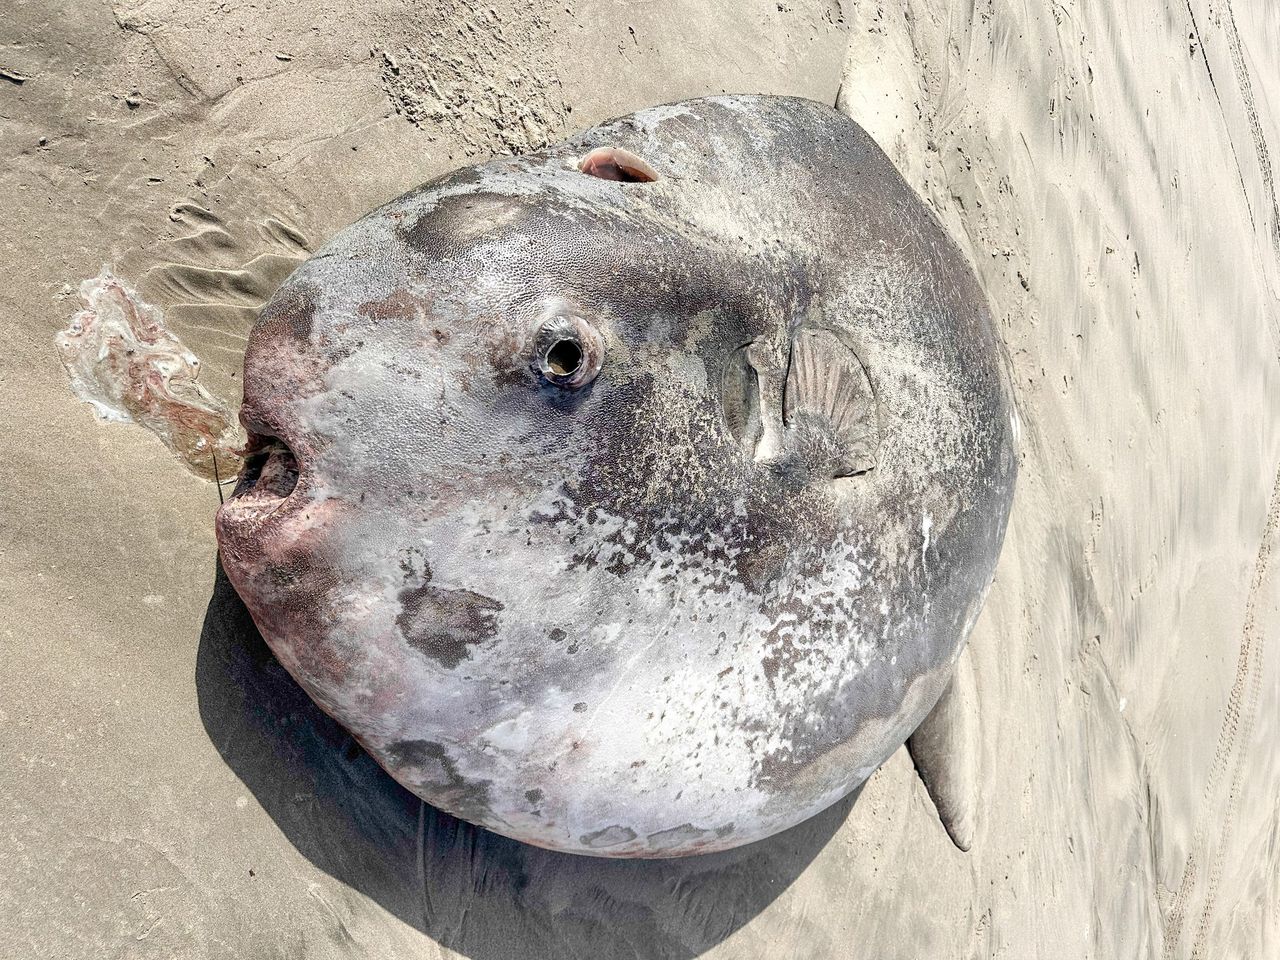 A sunfish washed up on the shore of Gearhart Beach in Oregon